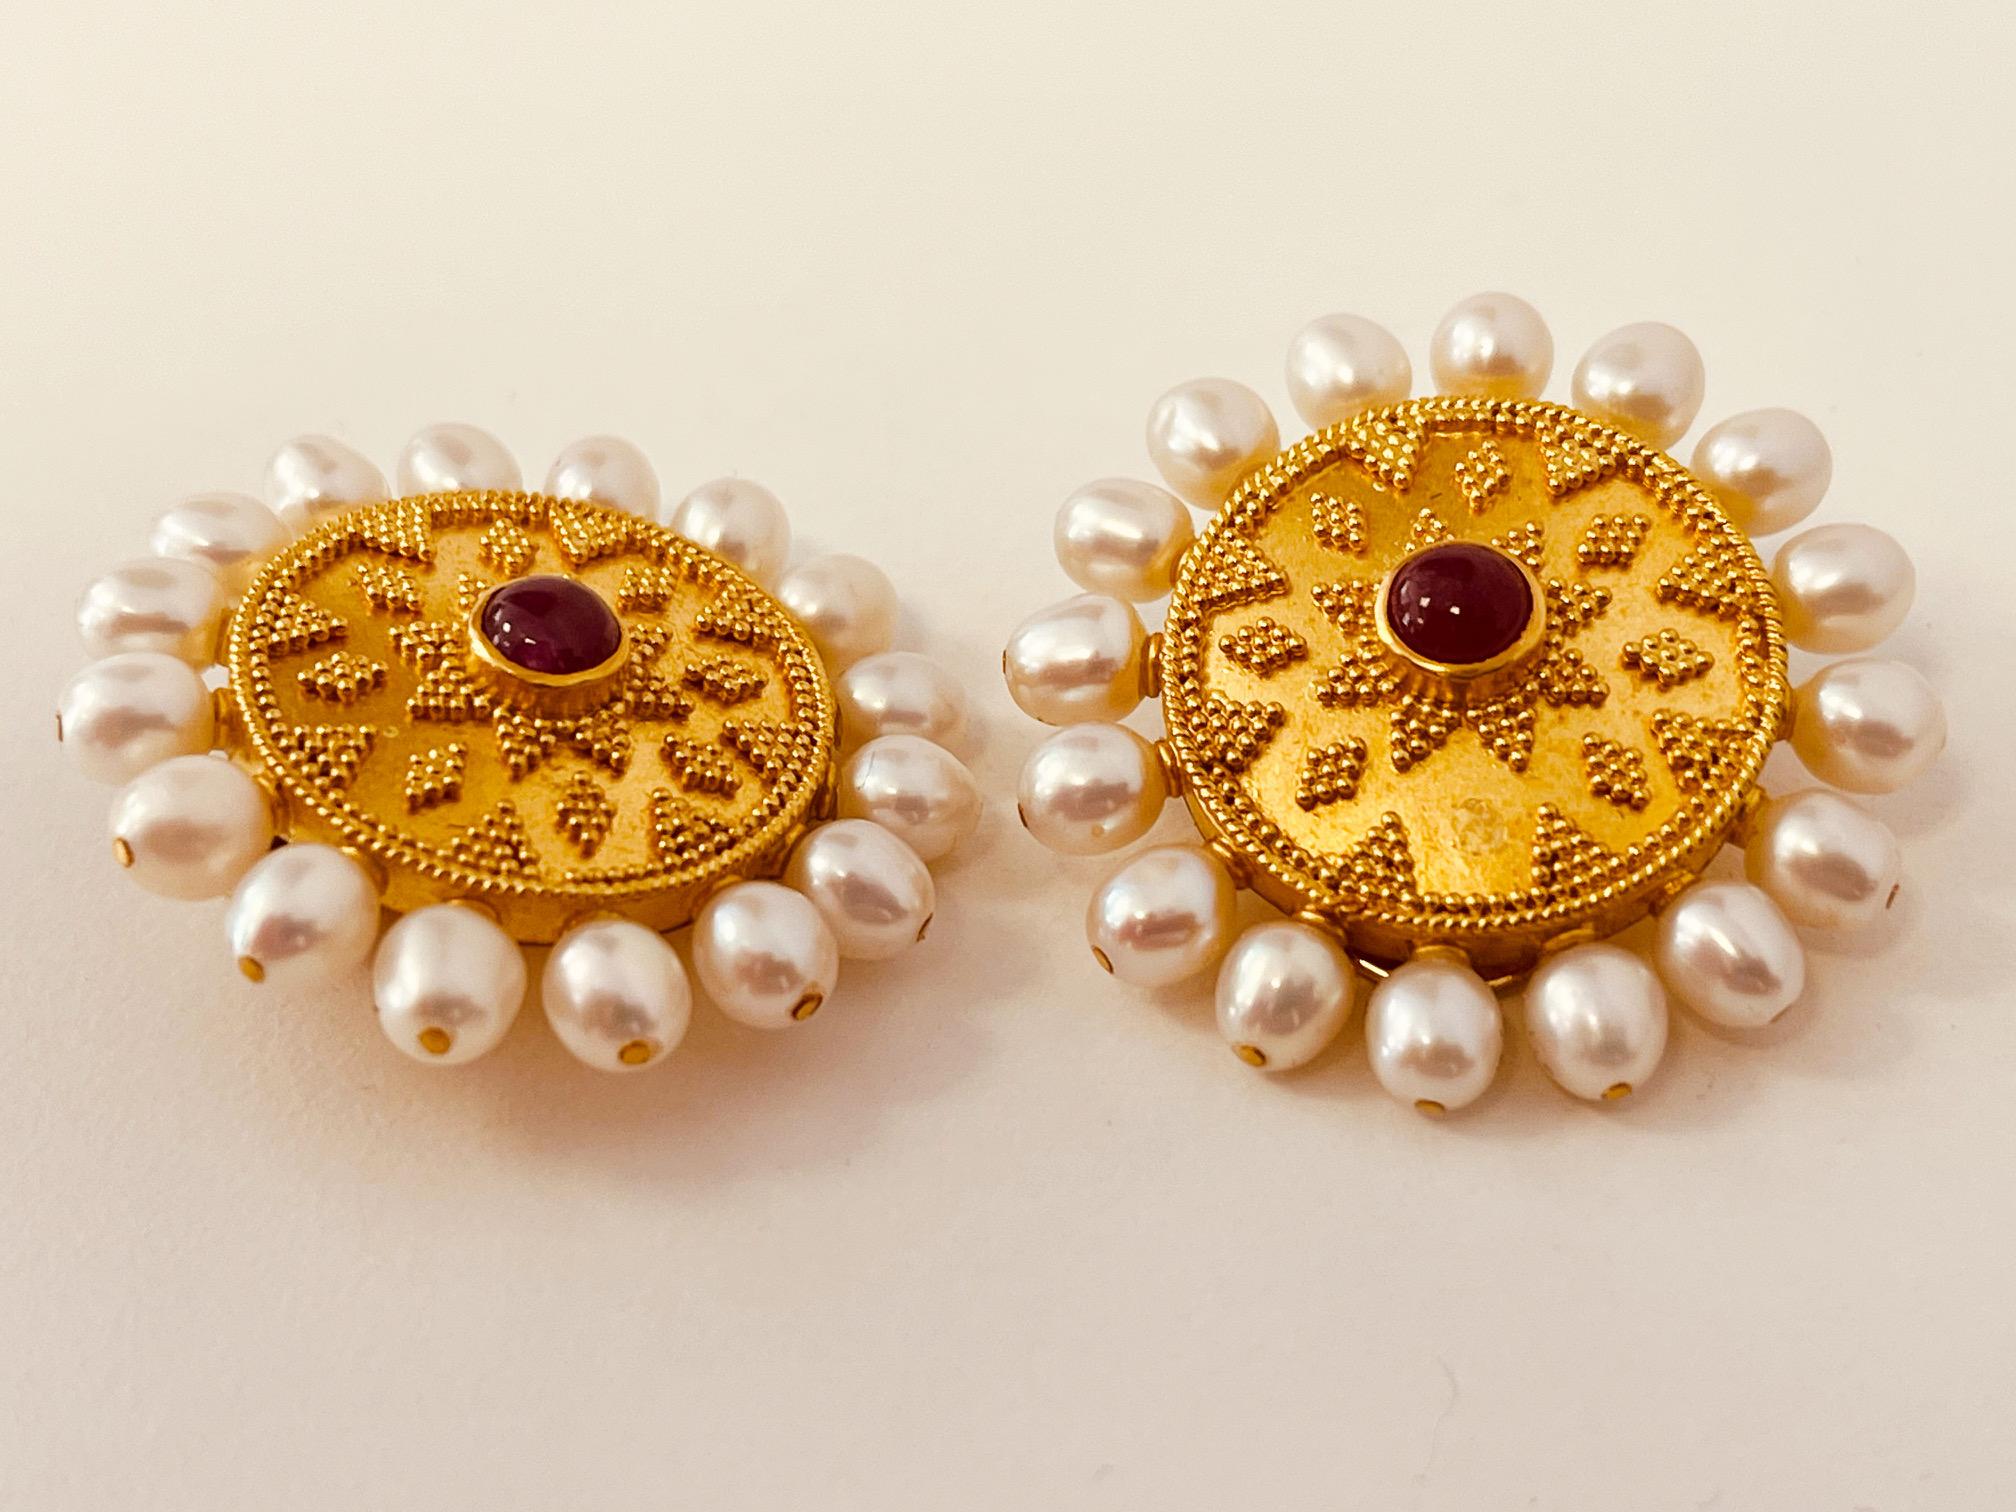 22ct Gold Granulated Disc Earrings Set With A Cabochon Ruby And Cultured Pearls For Sale 1